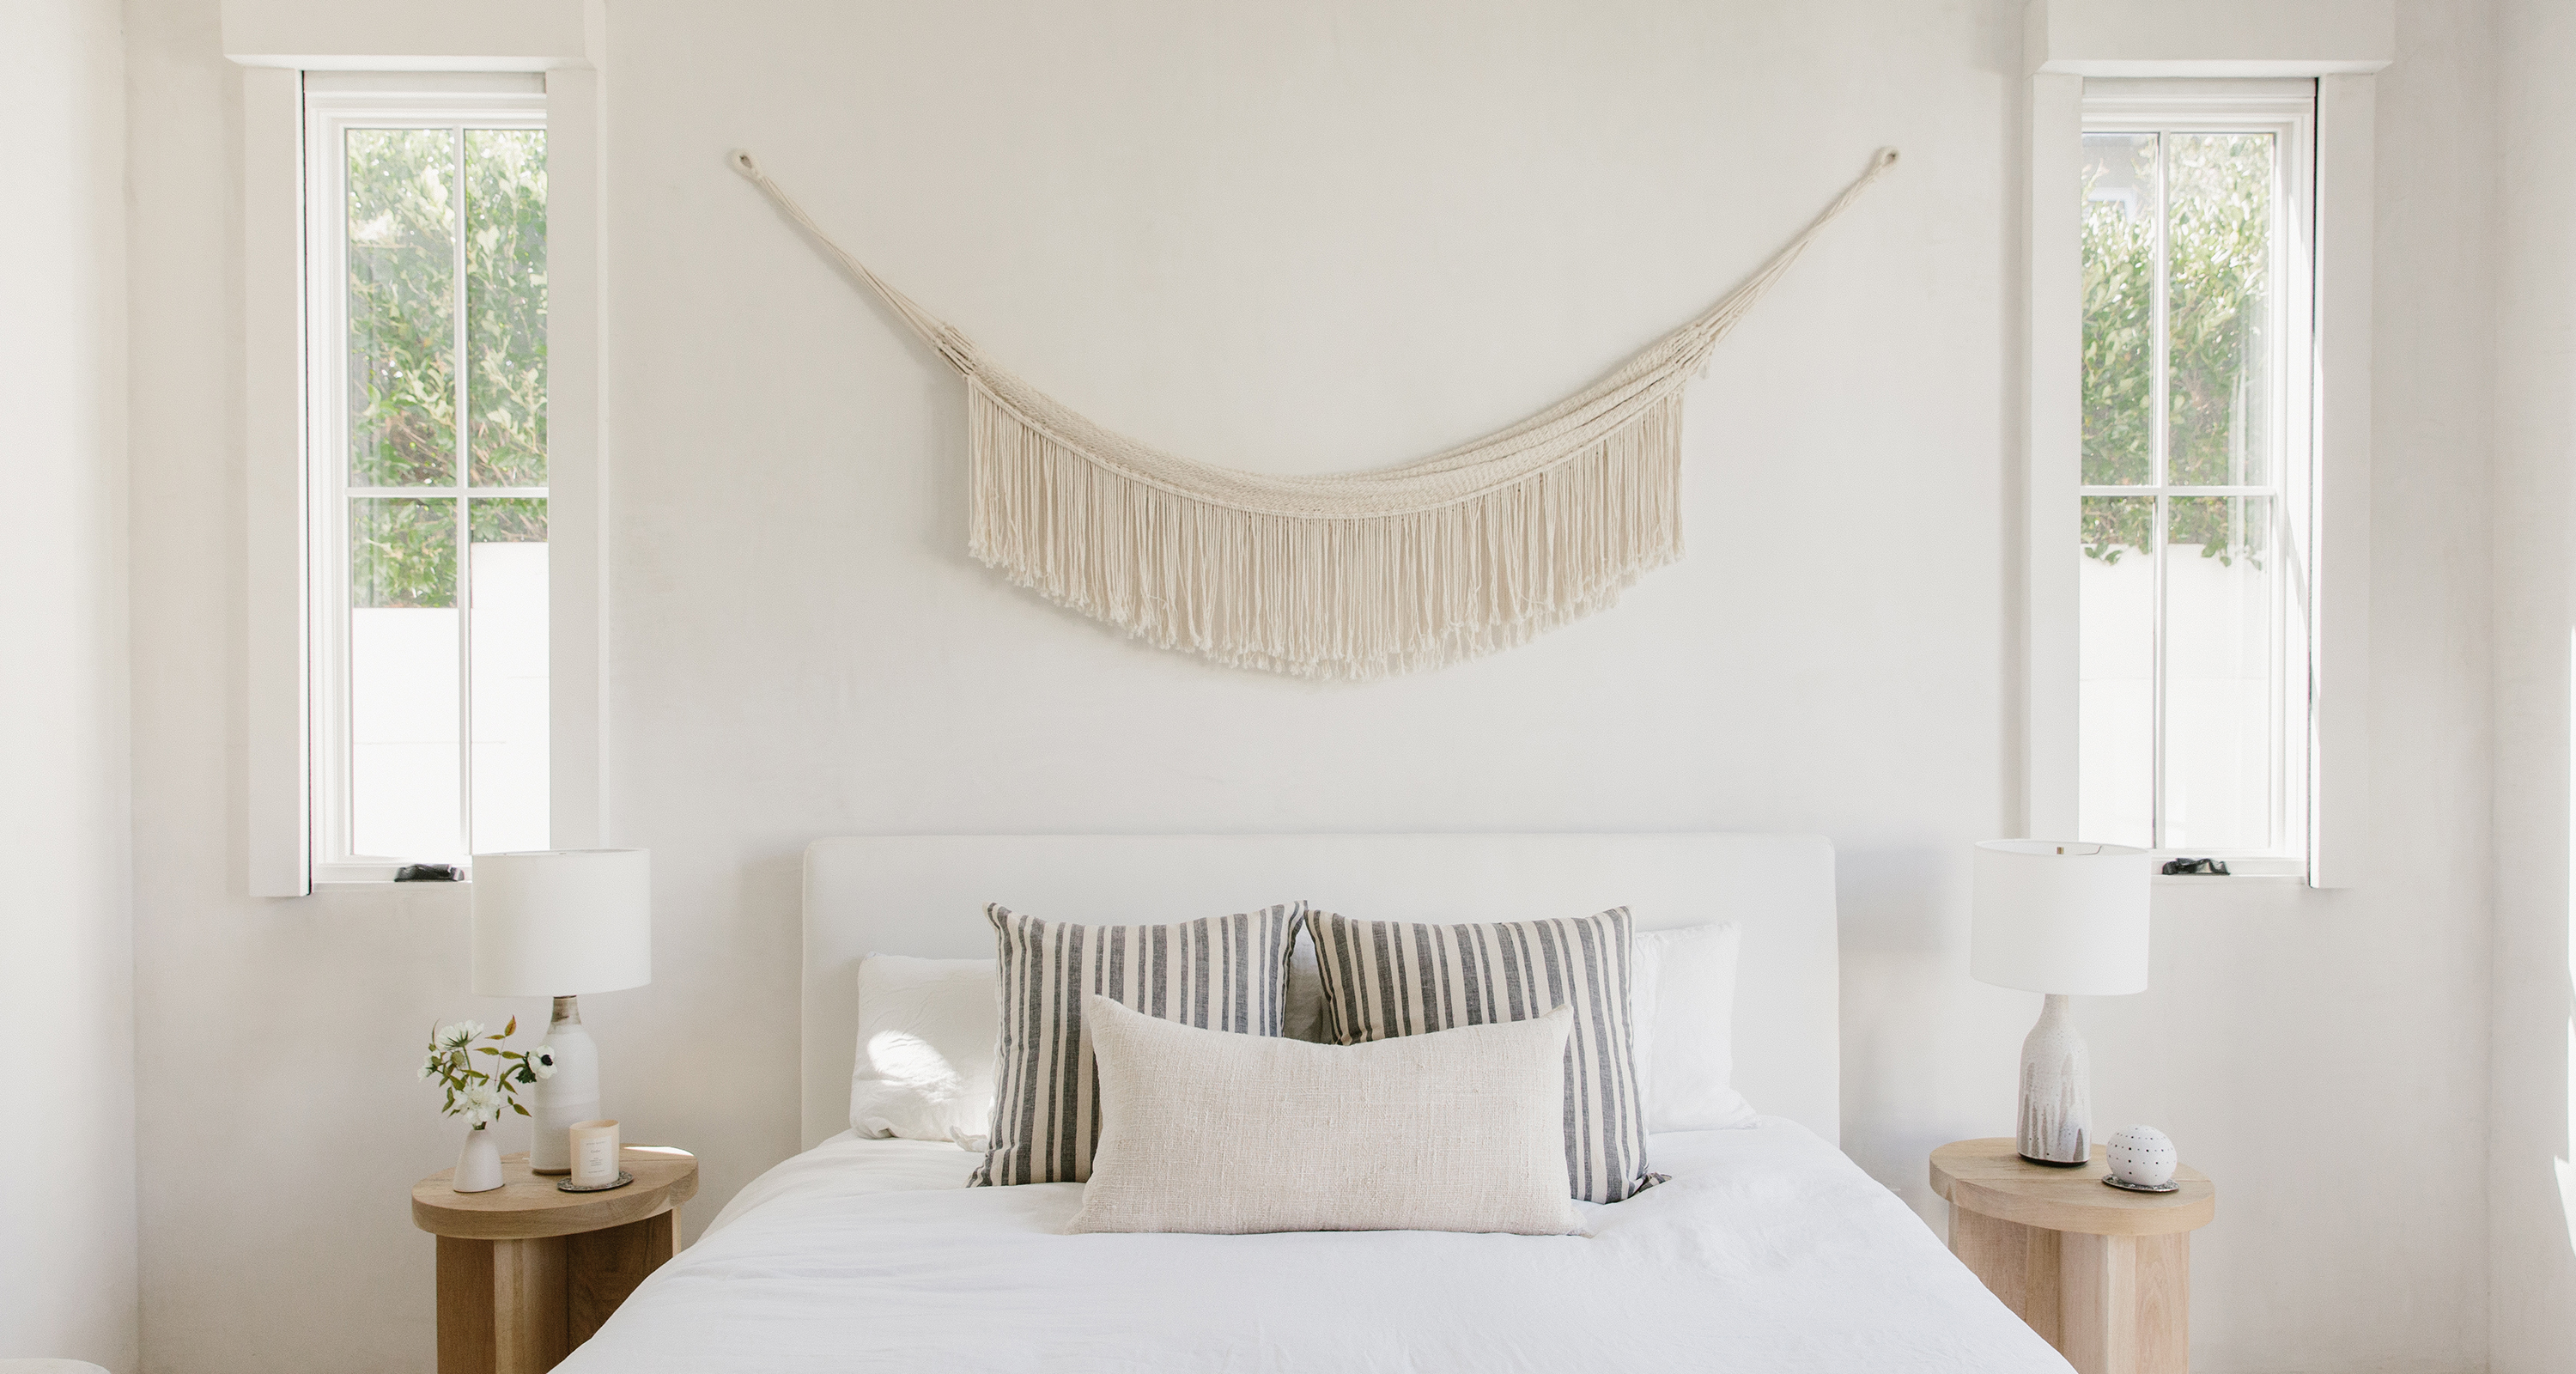 Update Any Room With Wall Hanging Decor That Does It All – Jenni Kayne